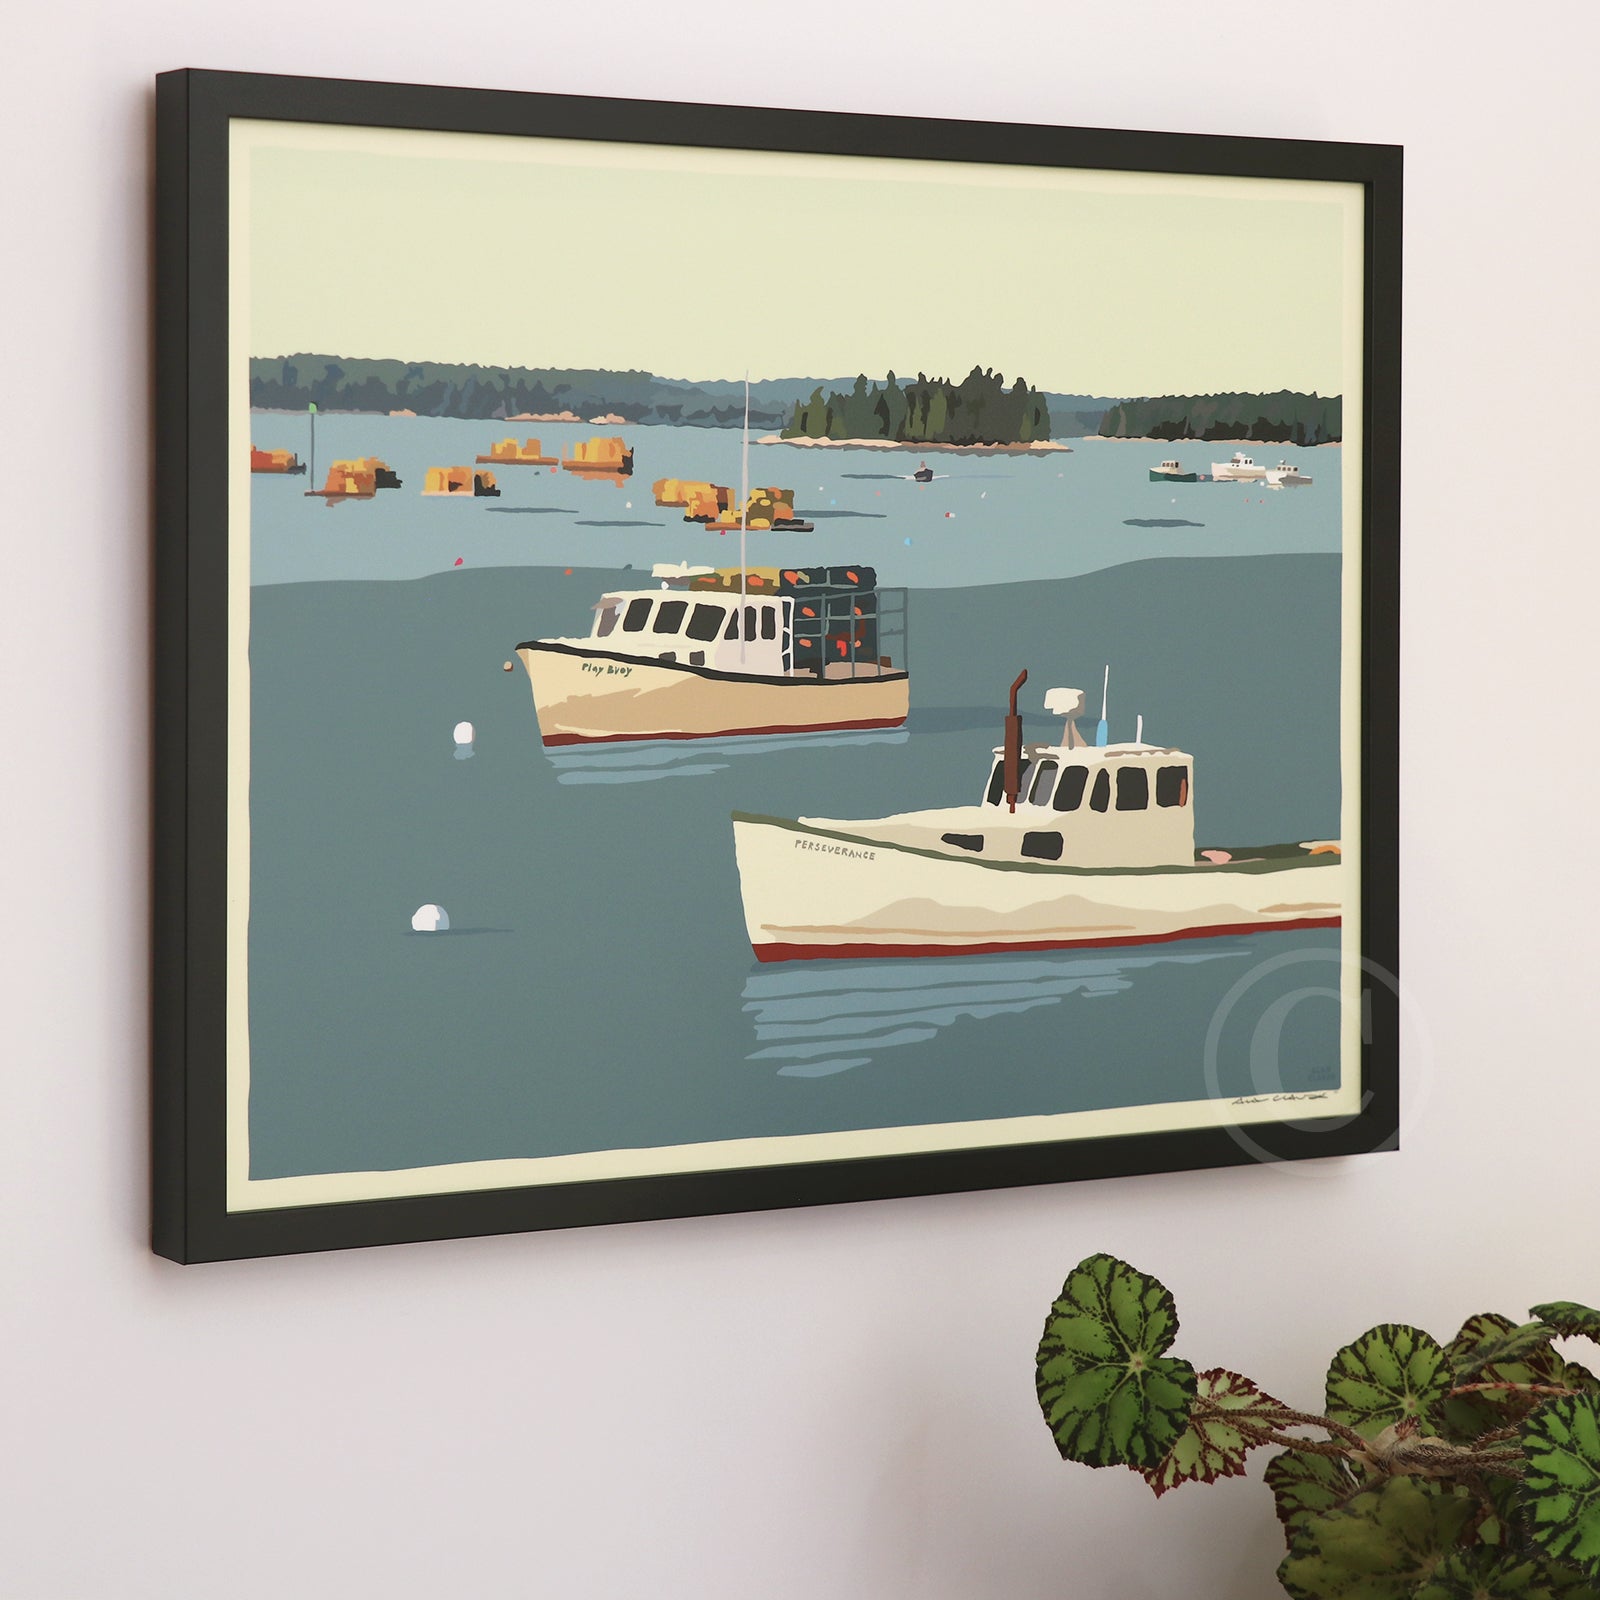 Lobster Boats in Friendship Art Print 18" x 24" Horizontal Framed Wall Poster By Alan Claude - Maine